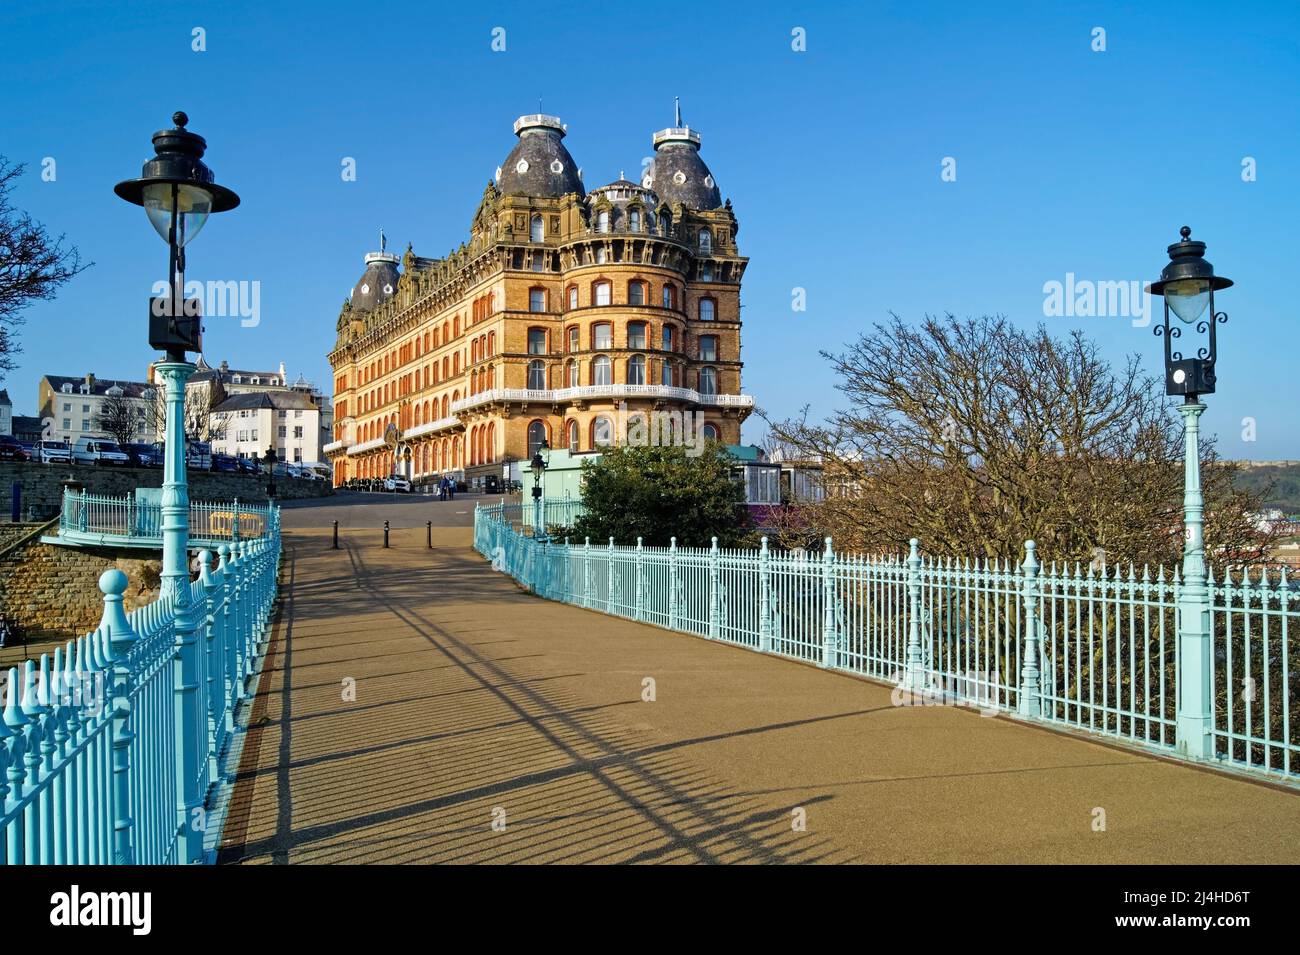 Royaume-Uni, North Yorkshire, Scarborough, Grand Hotel and Spa Bridge. Banque D'Images